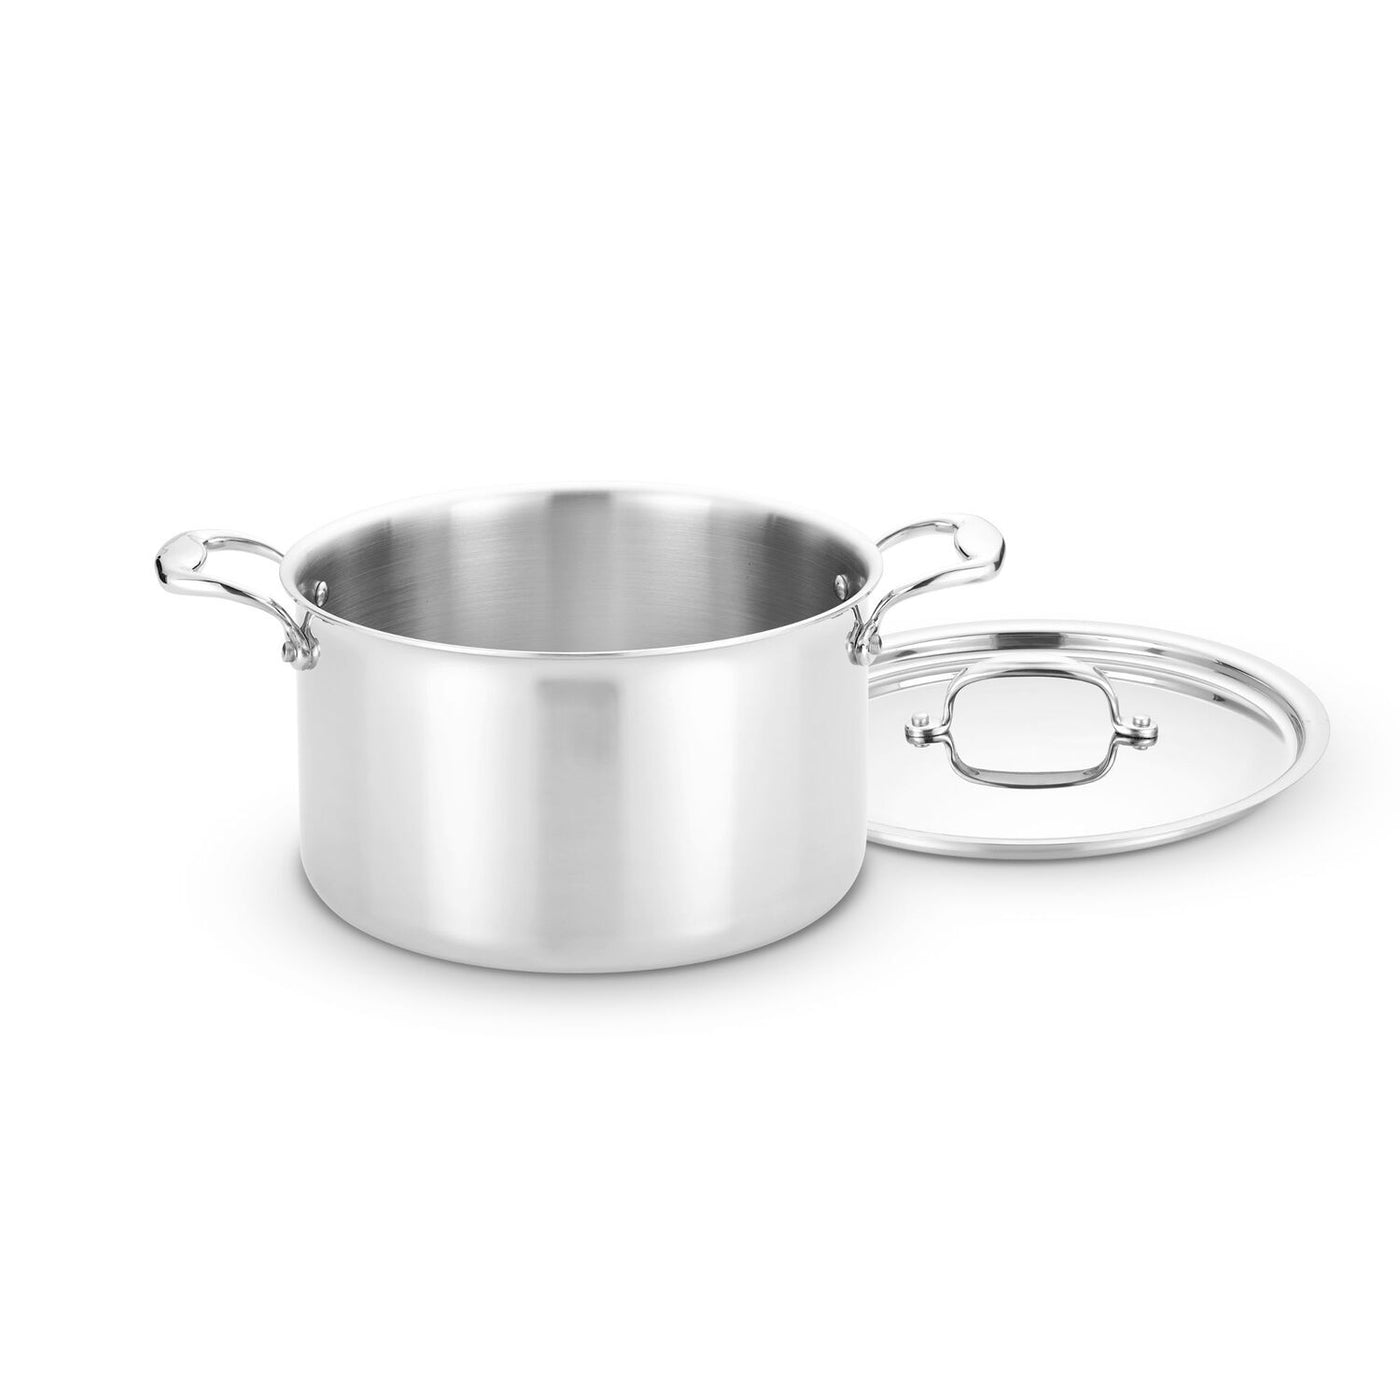 Heritage Steel Titanium Series 8 Quart Stock Pot with Lid, 5-Ply Clad  Stainless Steel Cookware with 316Ti, Made in USA